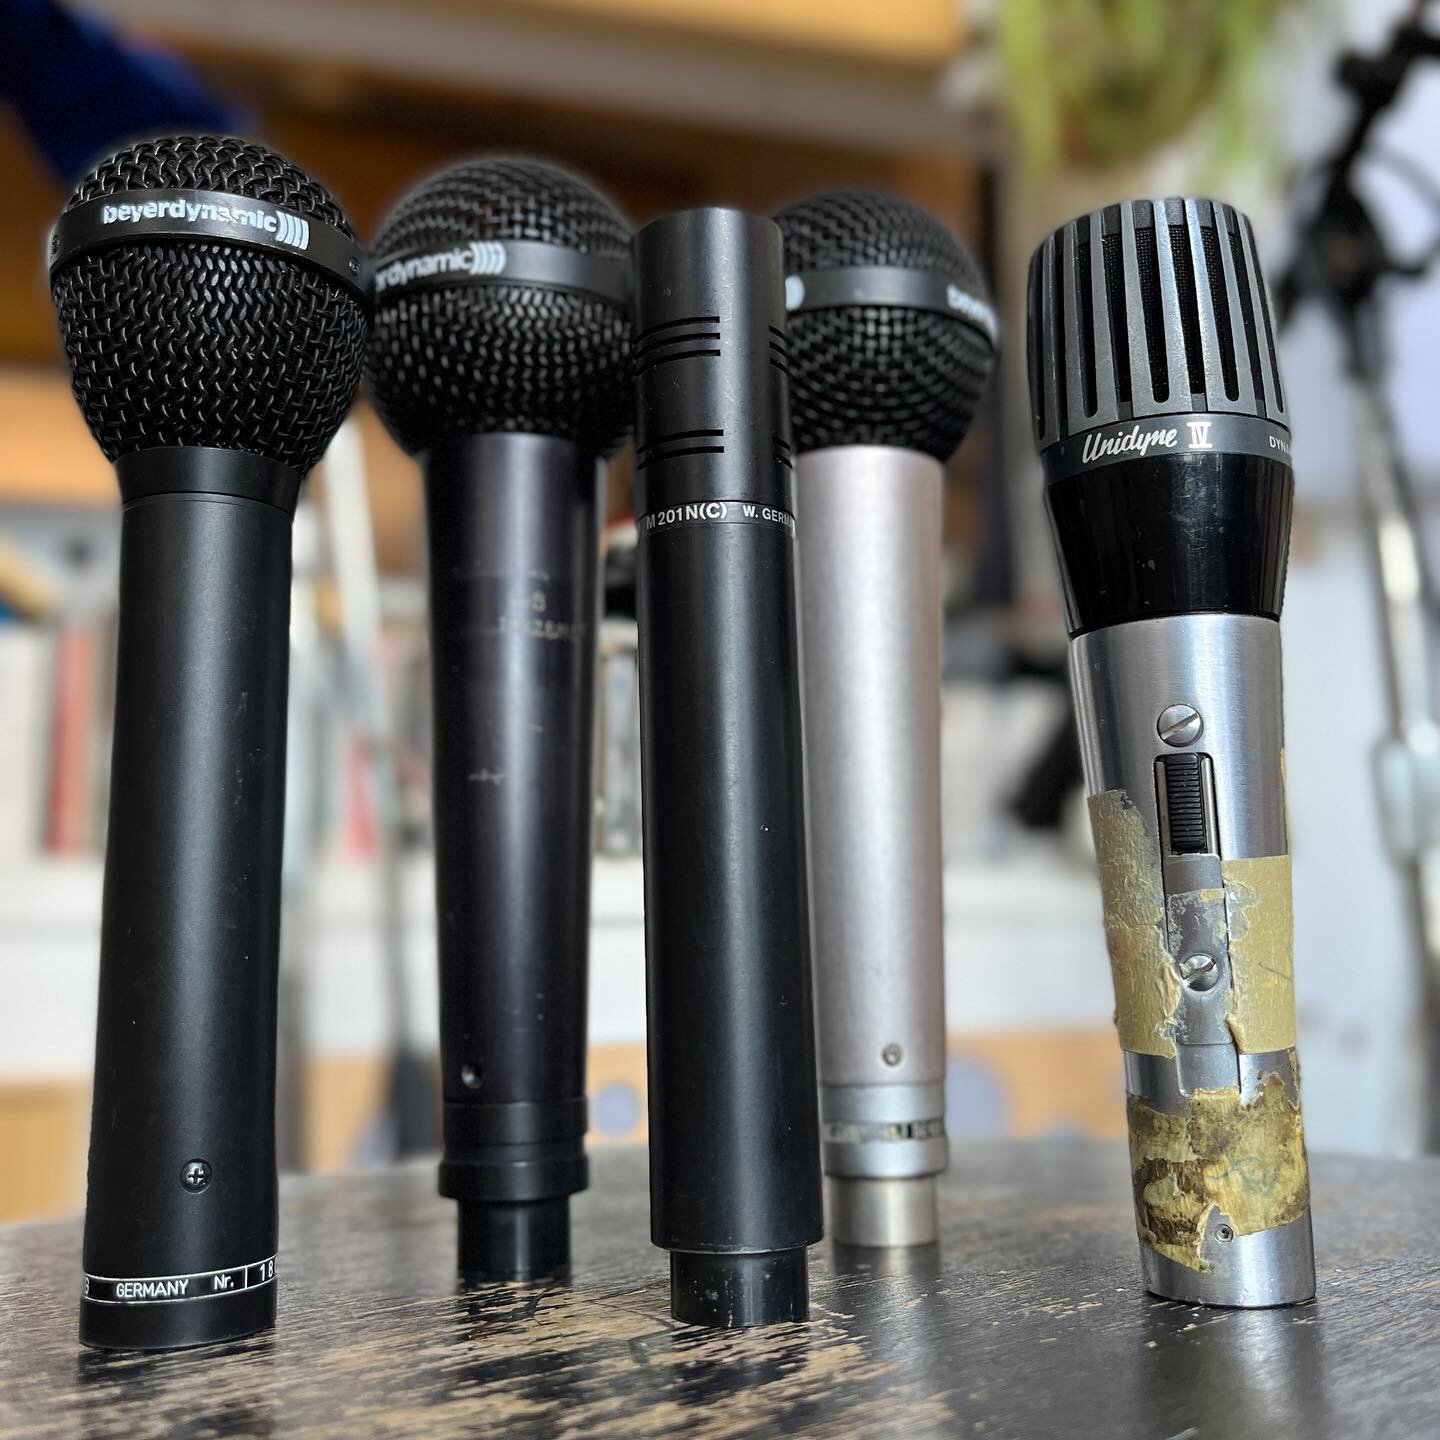 Picked up a couple mics today! Excited to see where these land. #beyerdynamic #shure548s #ribbonmic #m88tg #m500n #m201n #dynamicmicrophone #shuremicrophones #vintagemicrophone